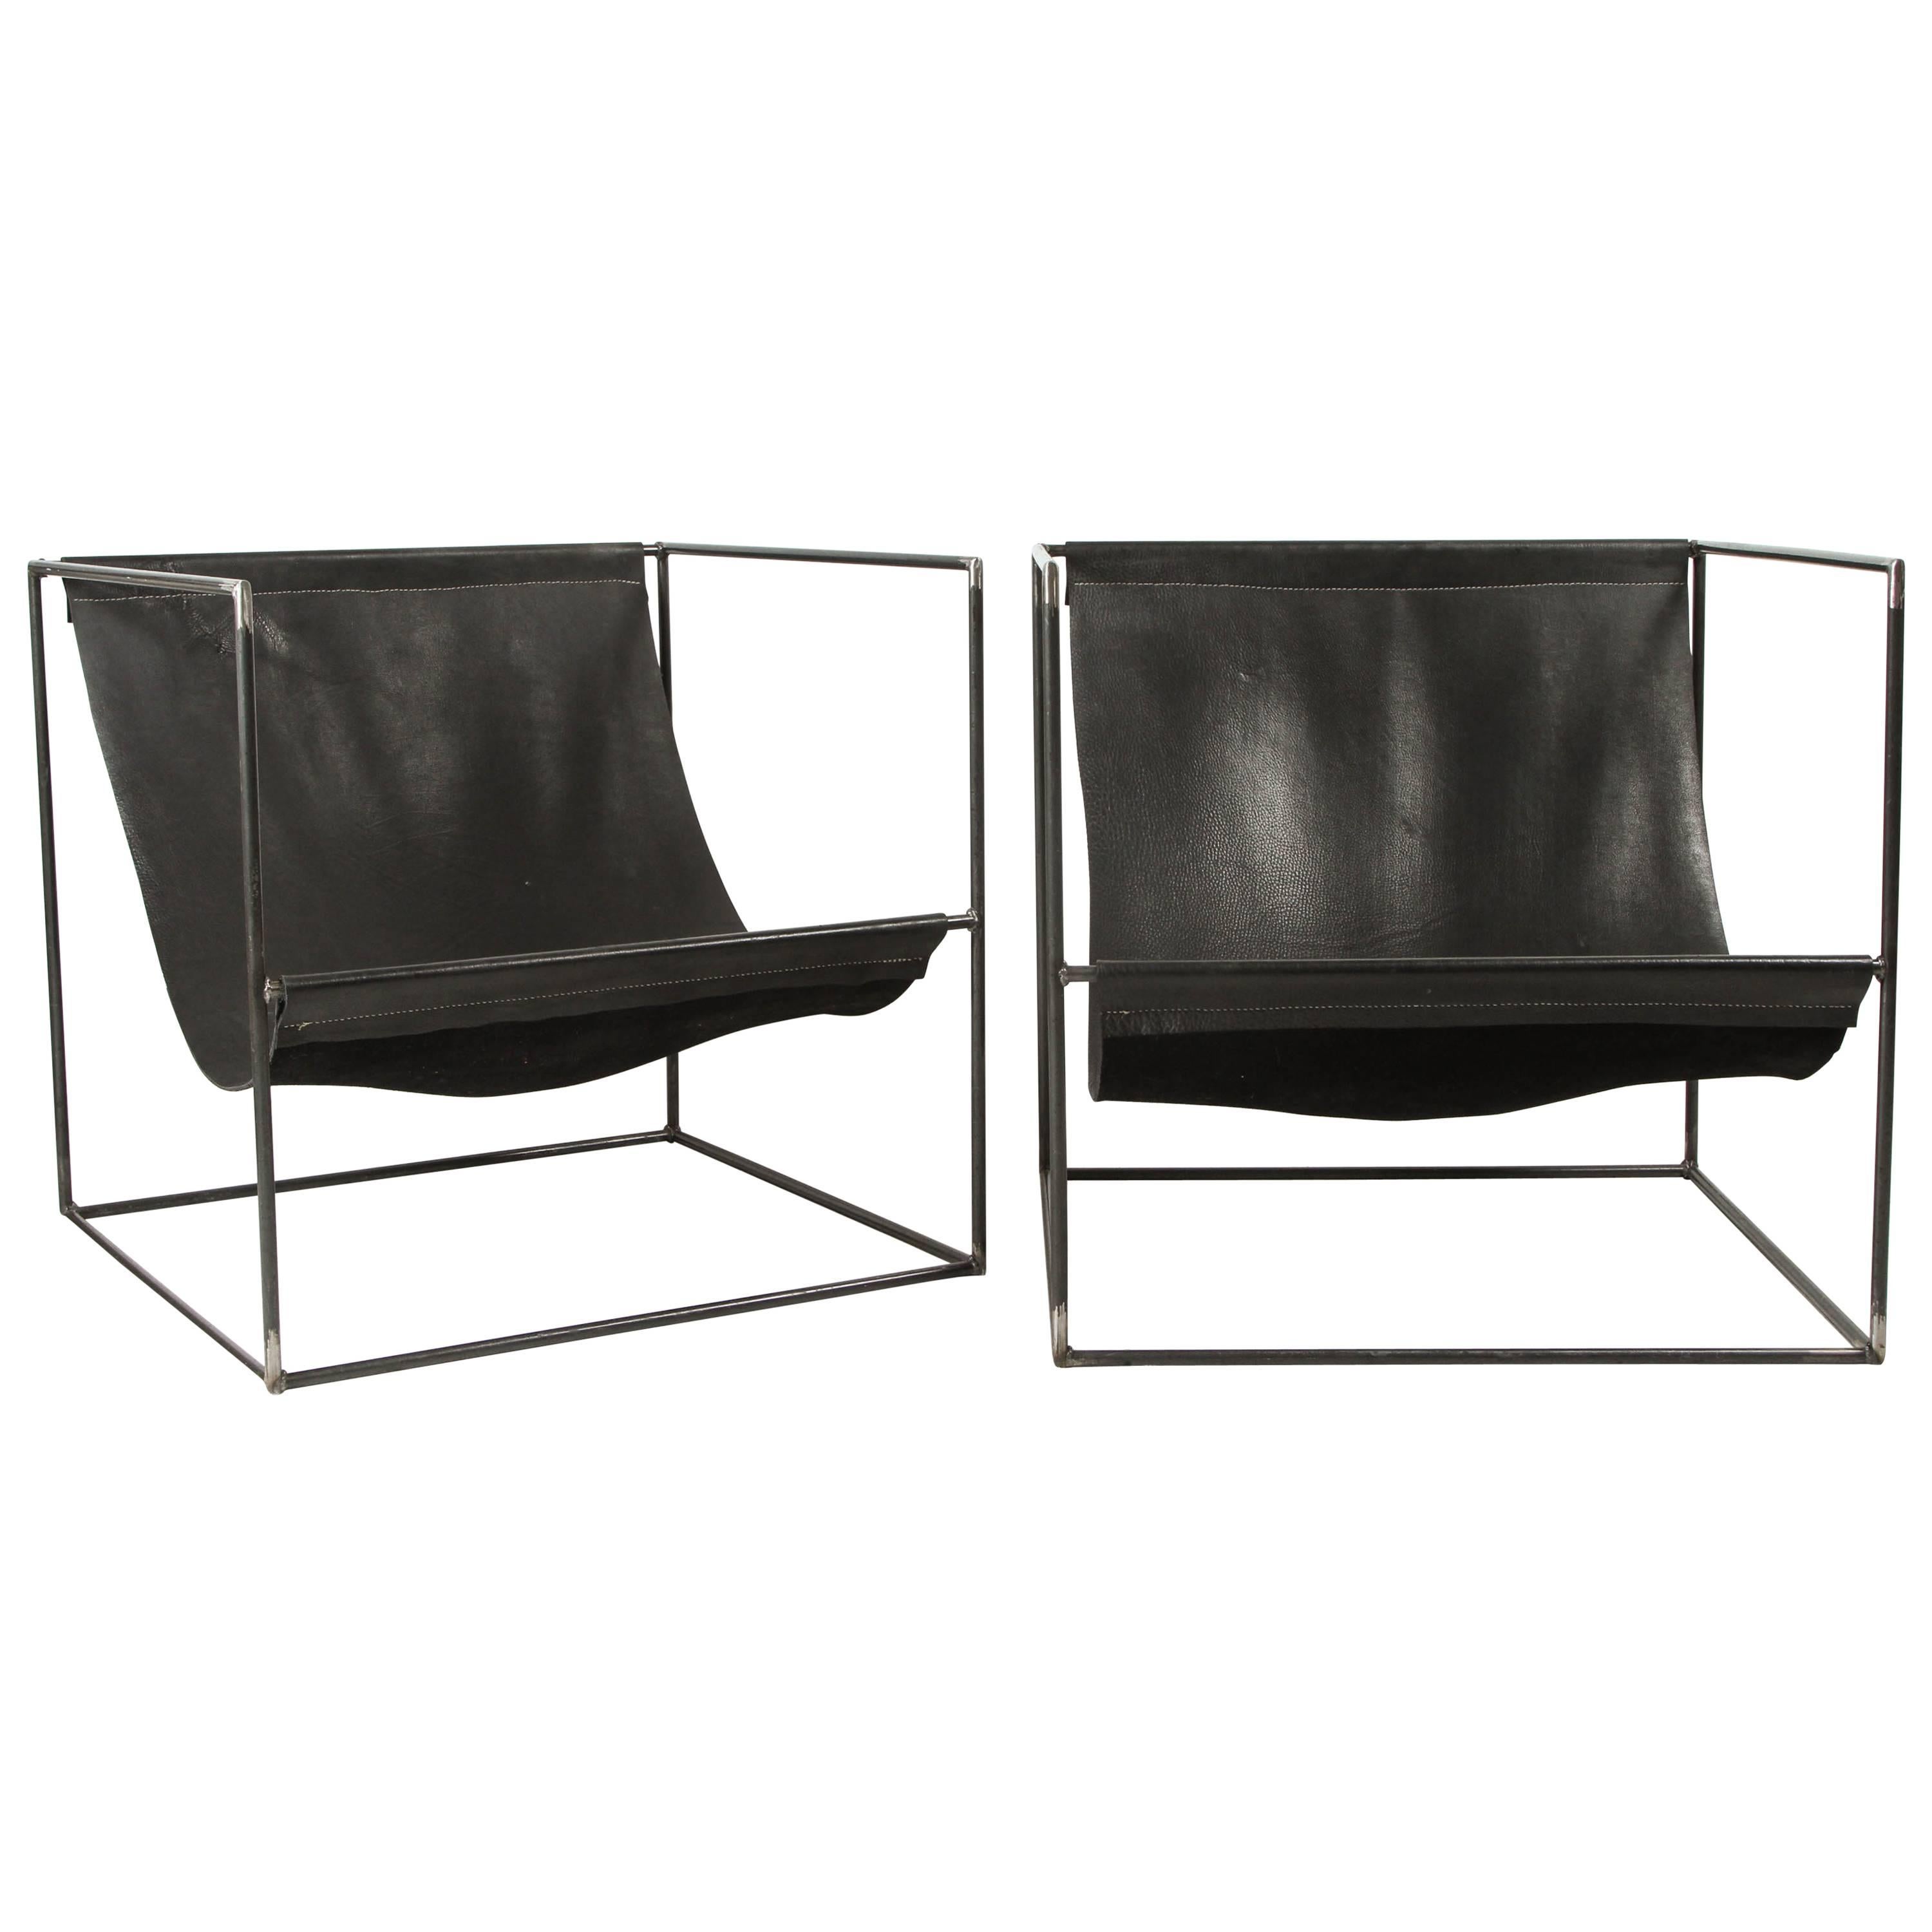 Pair of Leather Slinged Iron Cubed Chairs